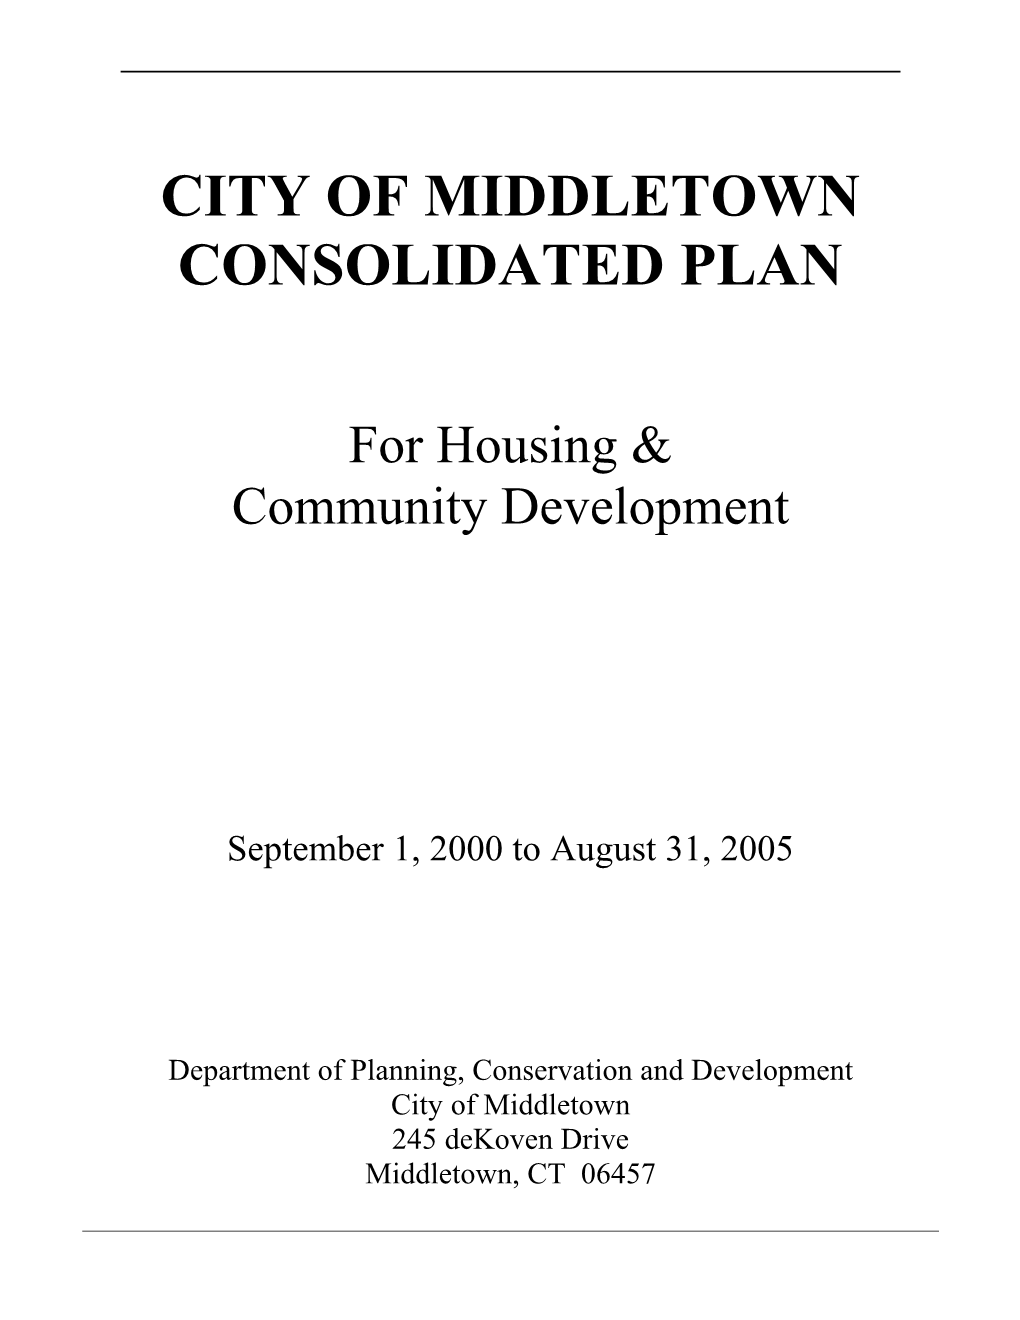 City of Middletown Consolidated Plan for Housing and Community